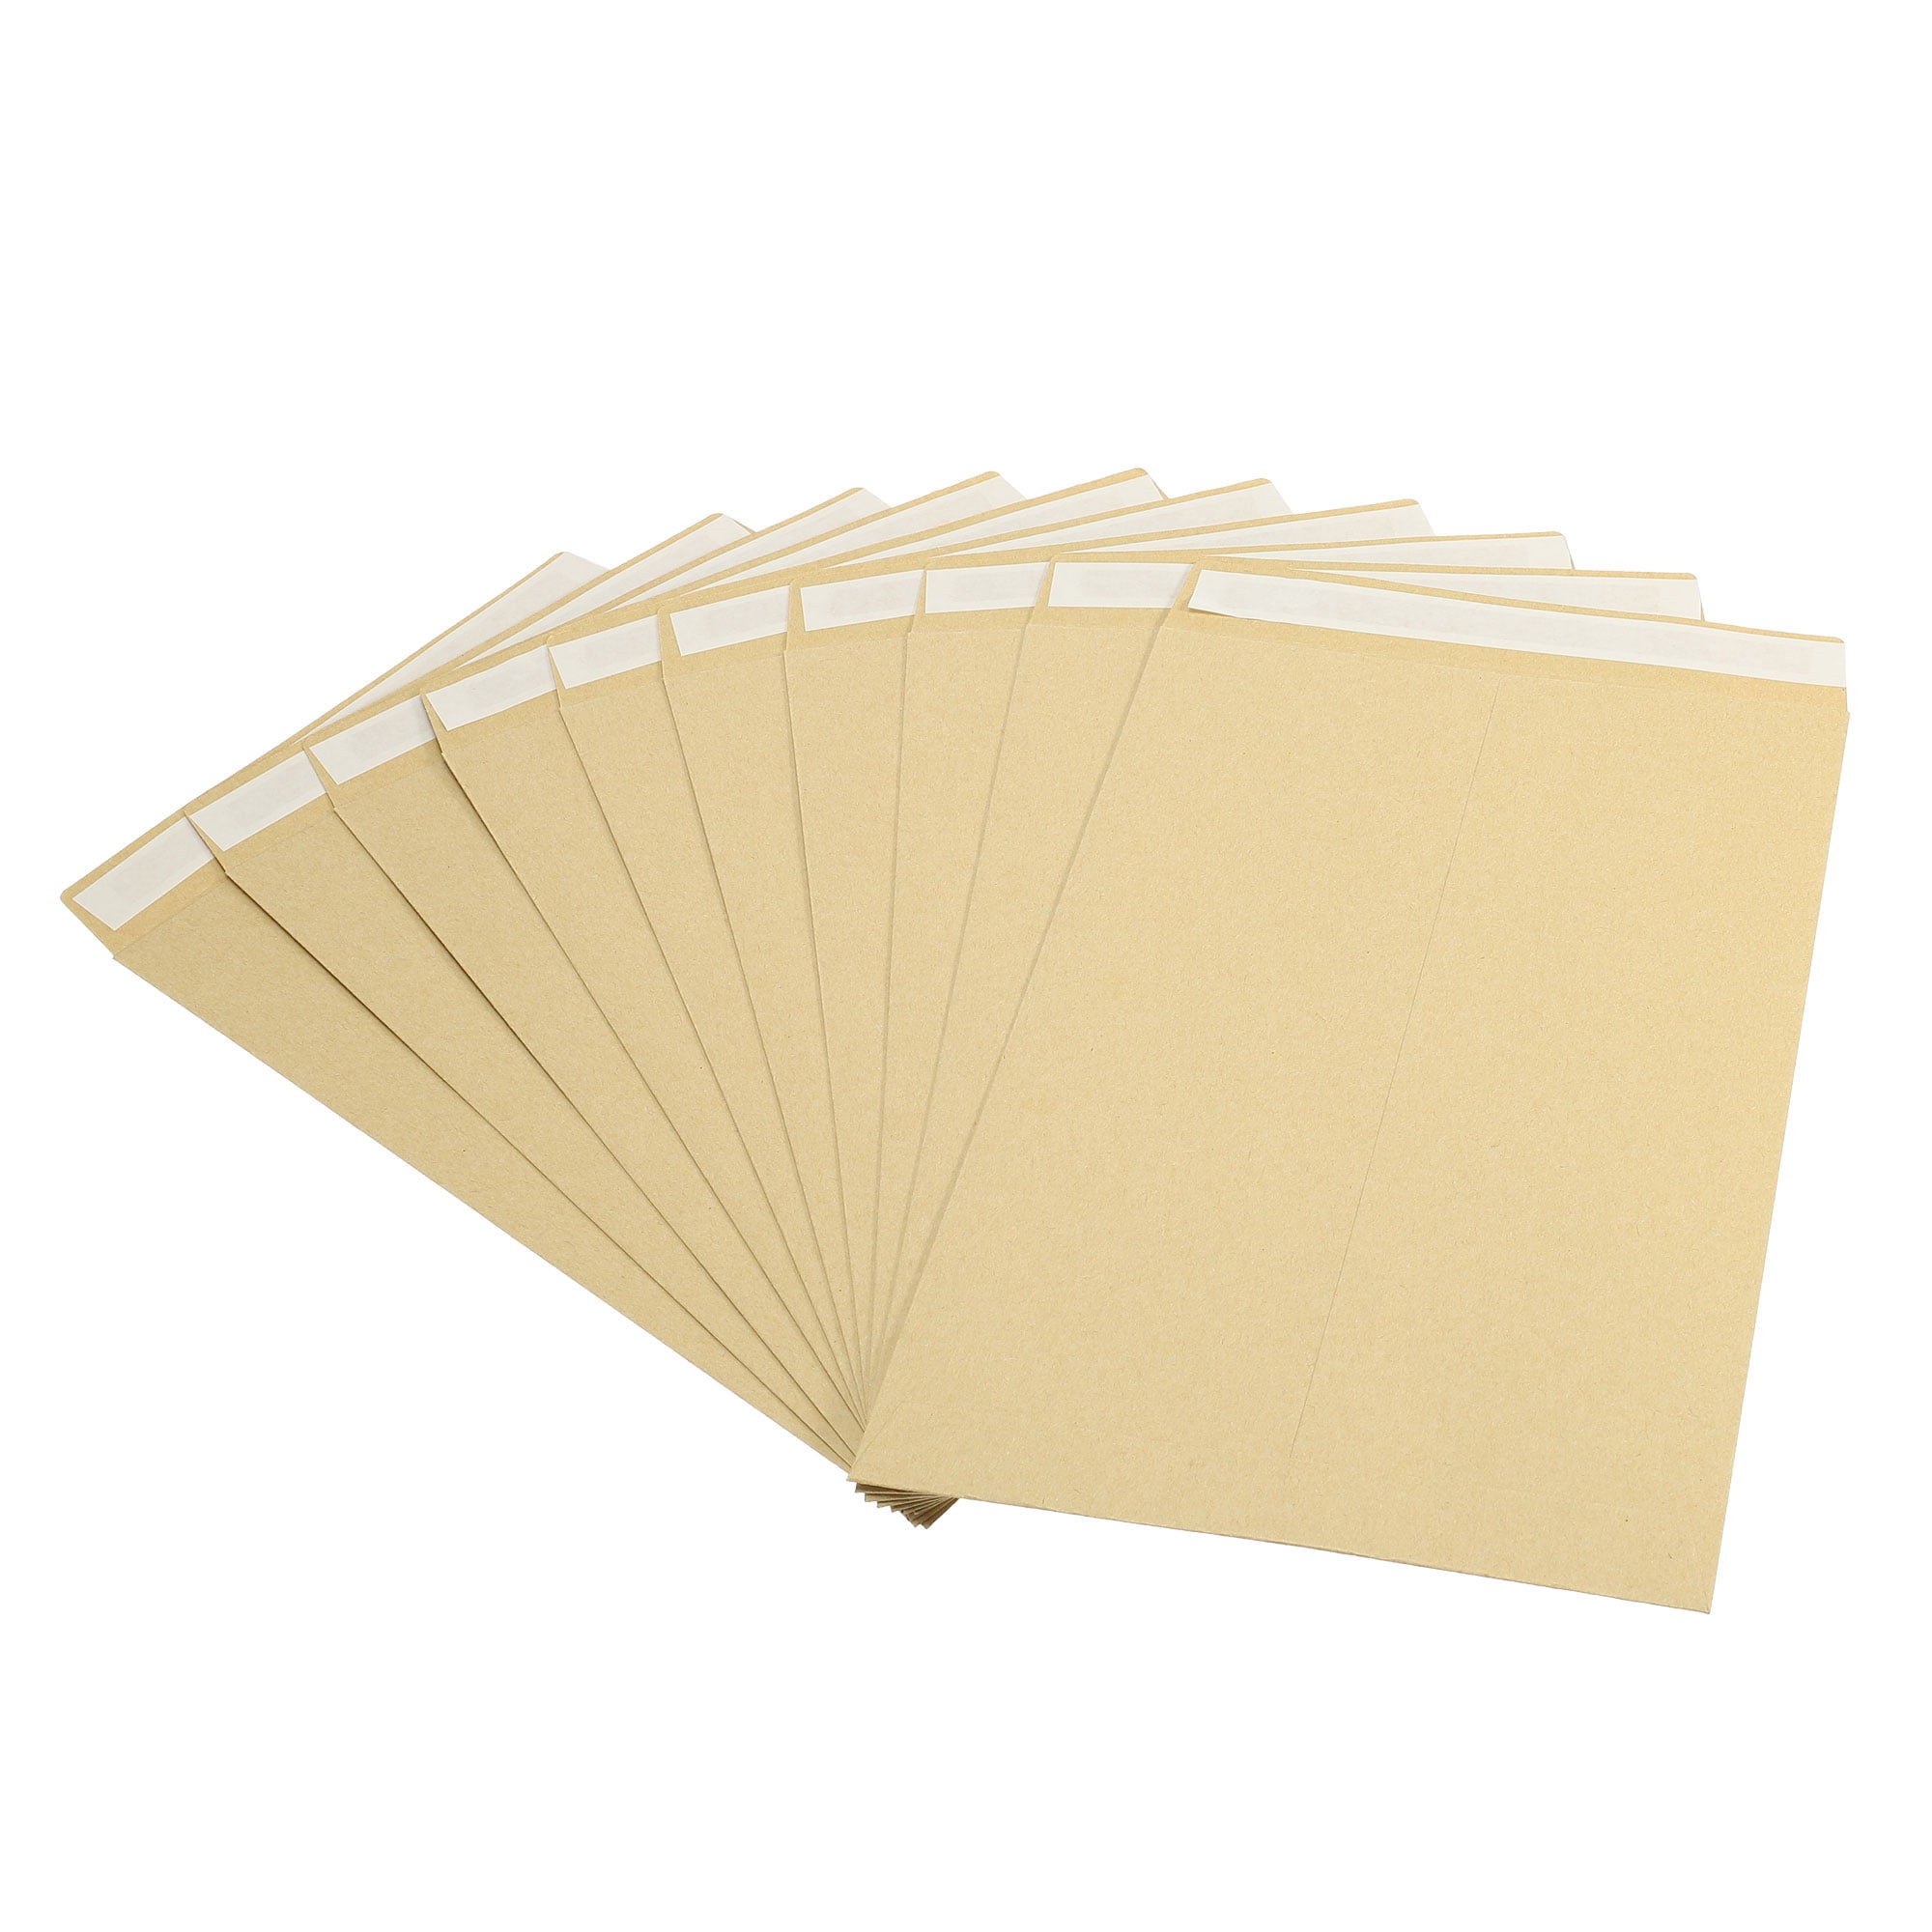 50 x Square Off White Colour Recycled Paper Envelopes Office Mailing Supply 16cm 